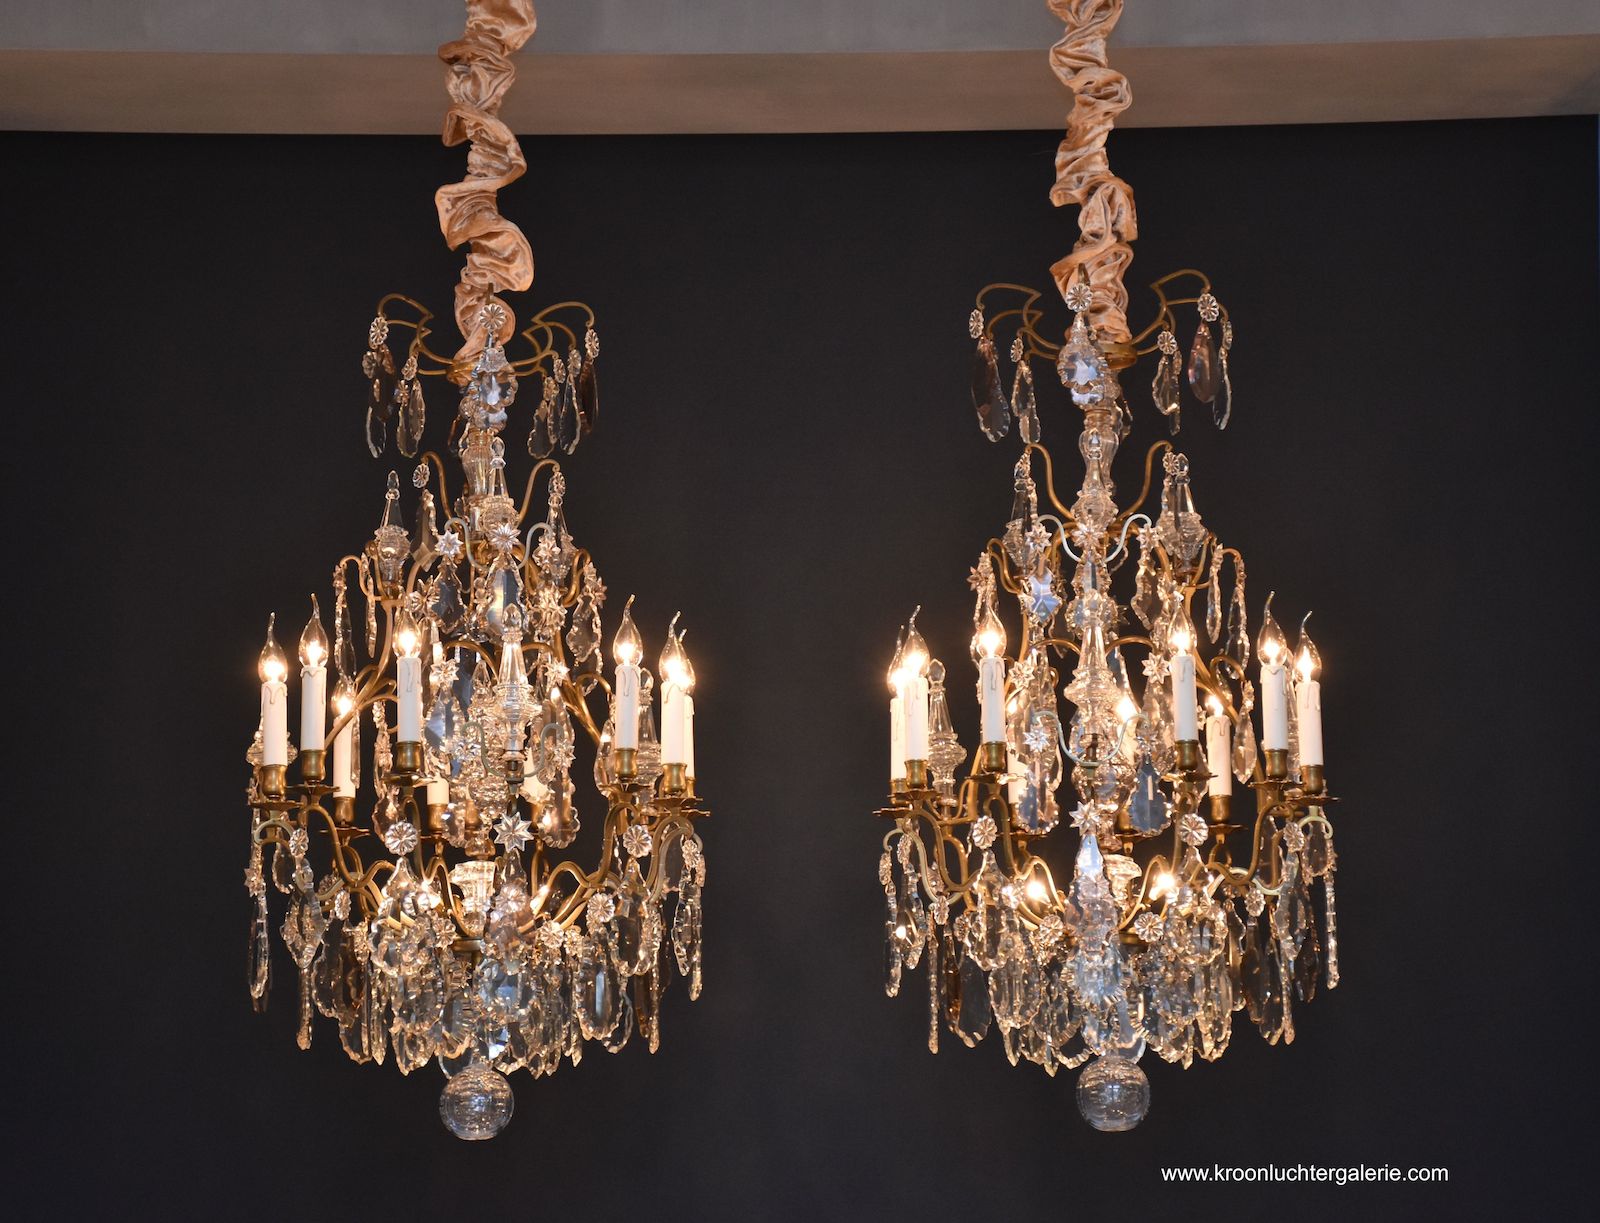 A pair of French chandeliers in the style of Louis XV